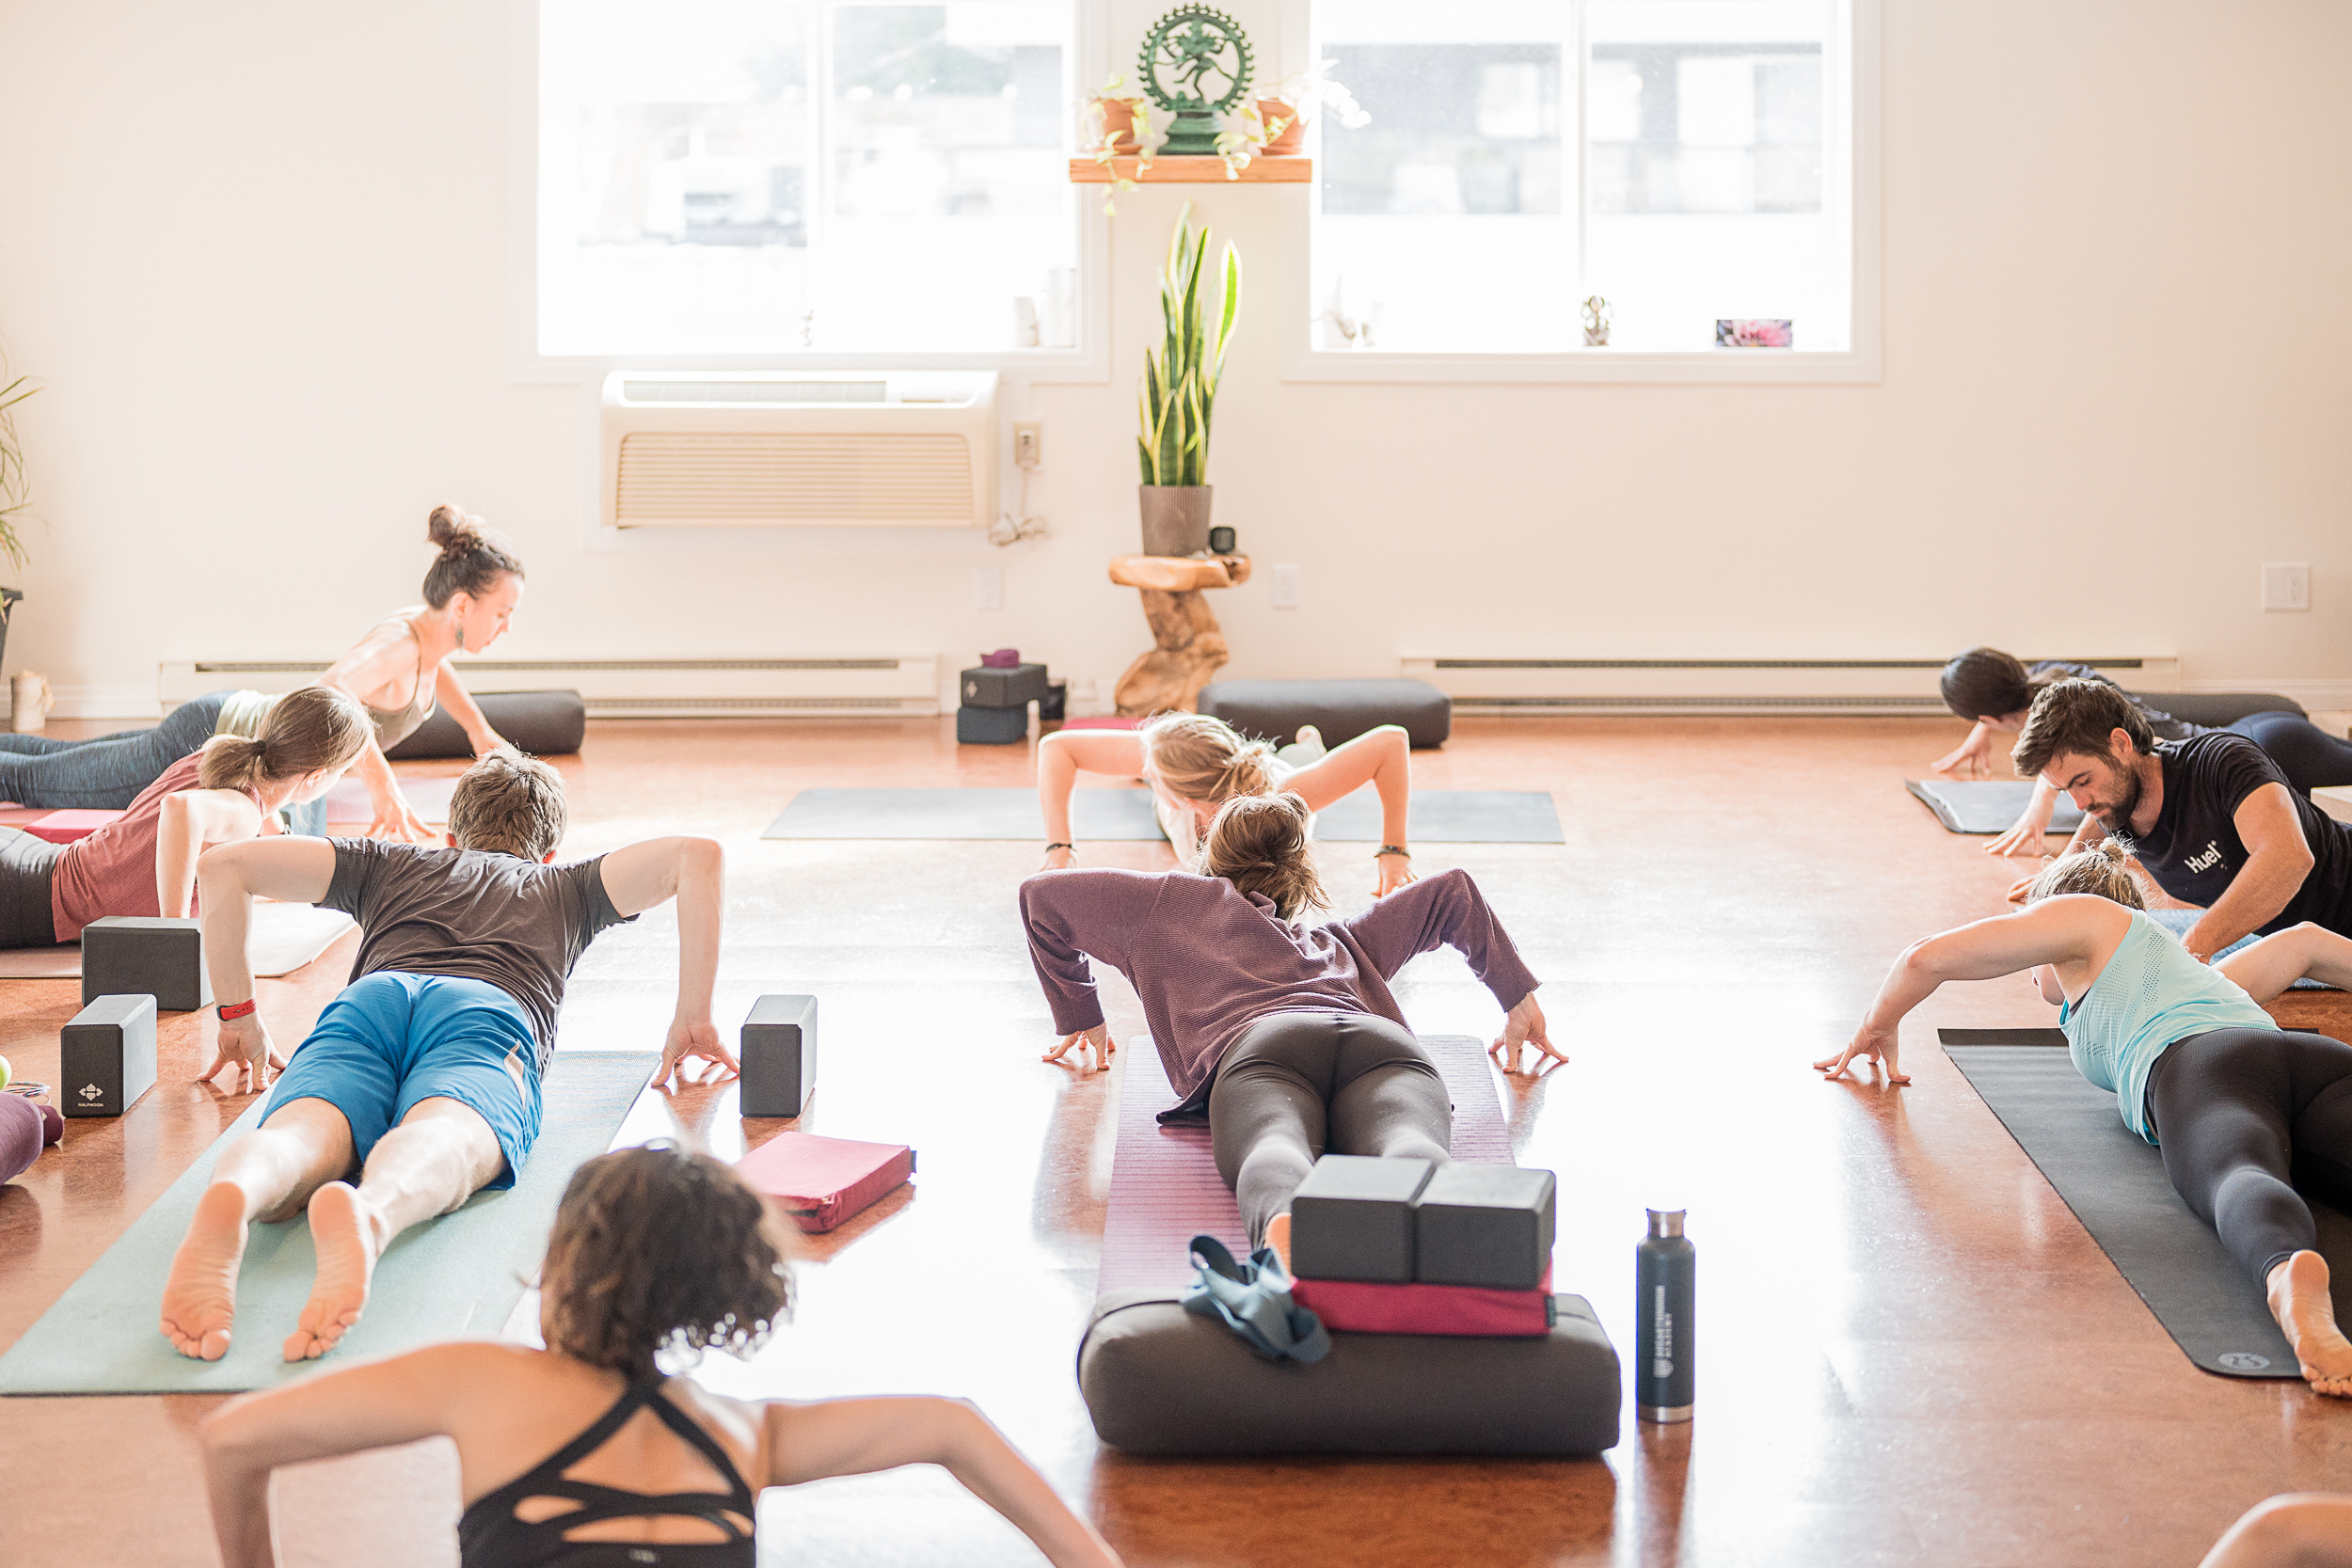 Yoga practitioners in a bright, airy Shala Yoga studio in Squamish engage in a relaxing floor stretch with support blocks, under the guidance of a teacher, promoting wellness and community spirit.